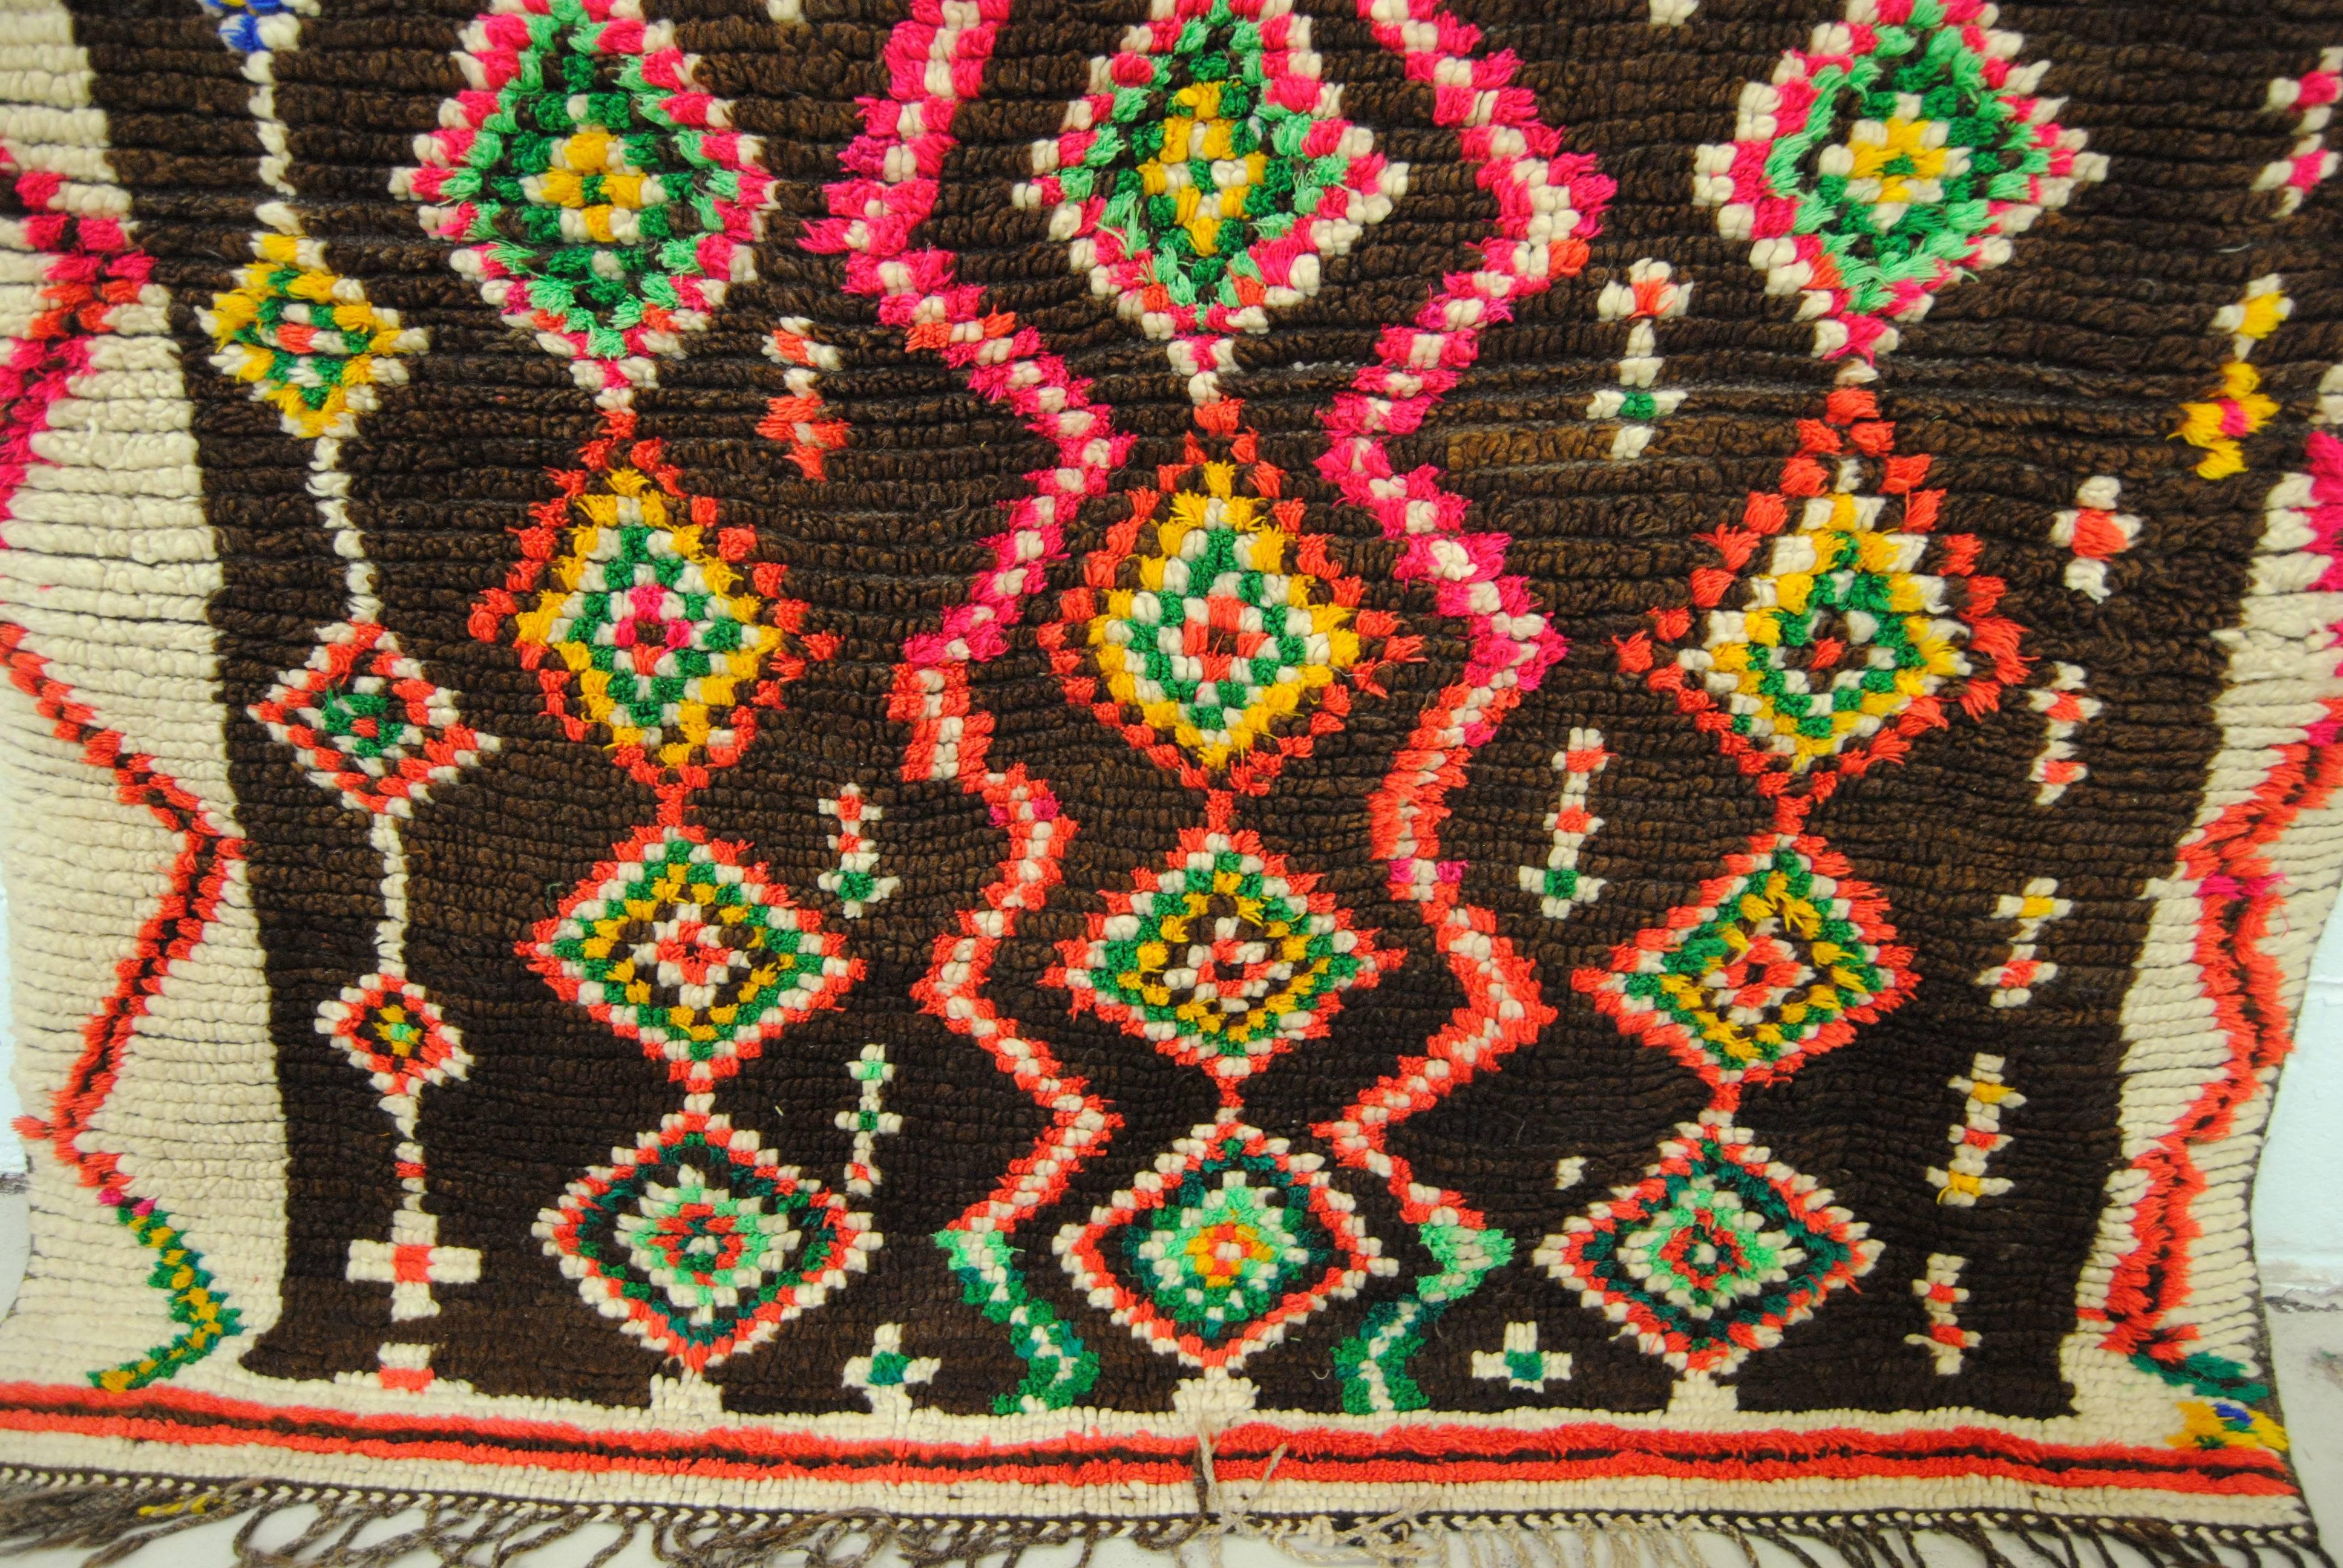 Moroccan hand-loomed wool Ourika Berber rug from the Atlas Mountains. Textile has a thick wool pile with colorful tribal designs. Rug has been recently professionally cleaned and is ready for display on the wall or floor. Measures: 4'10